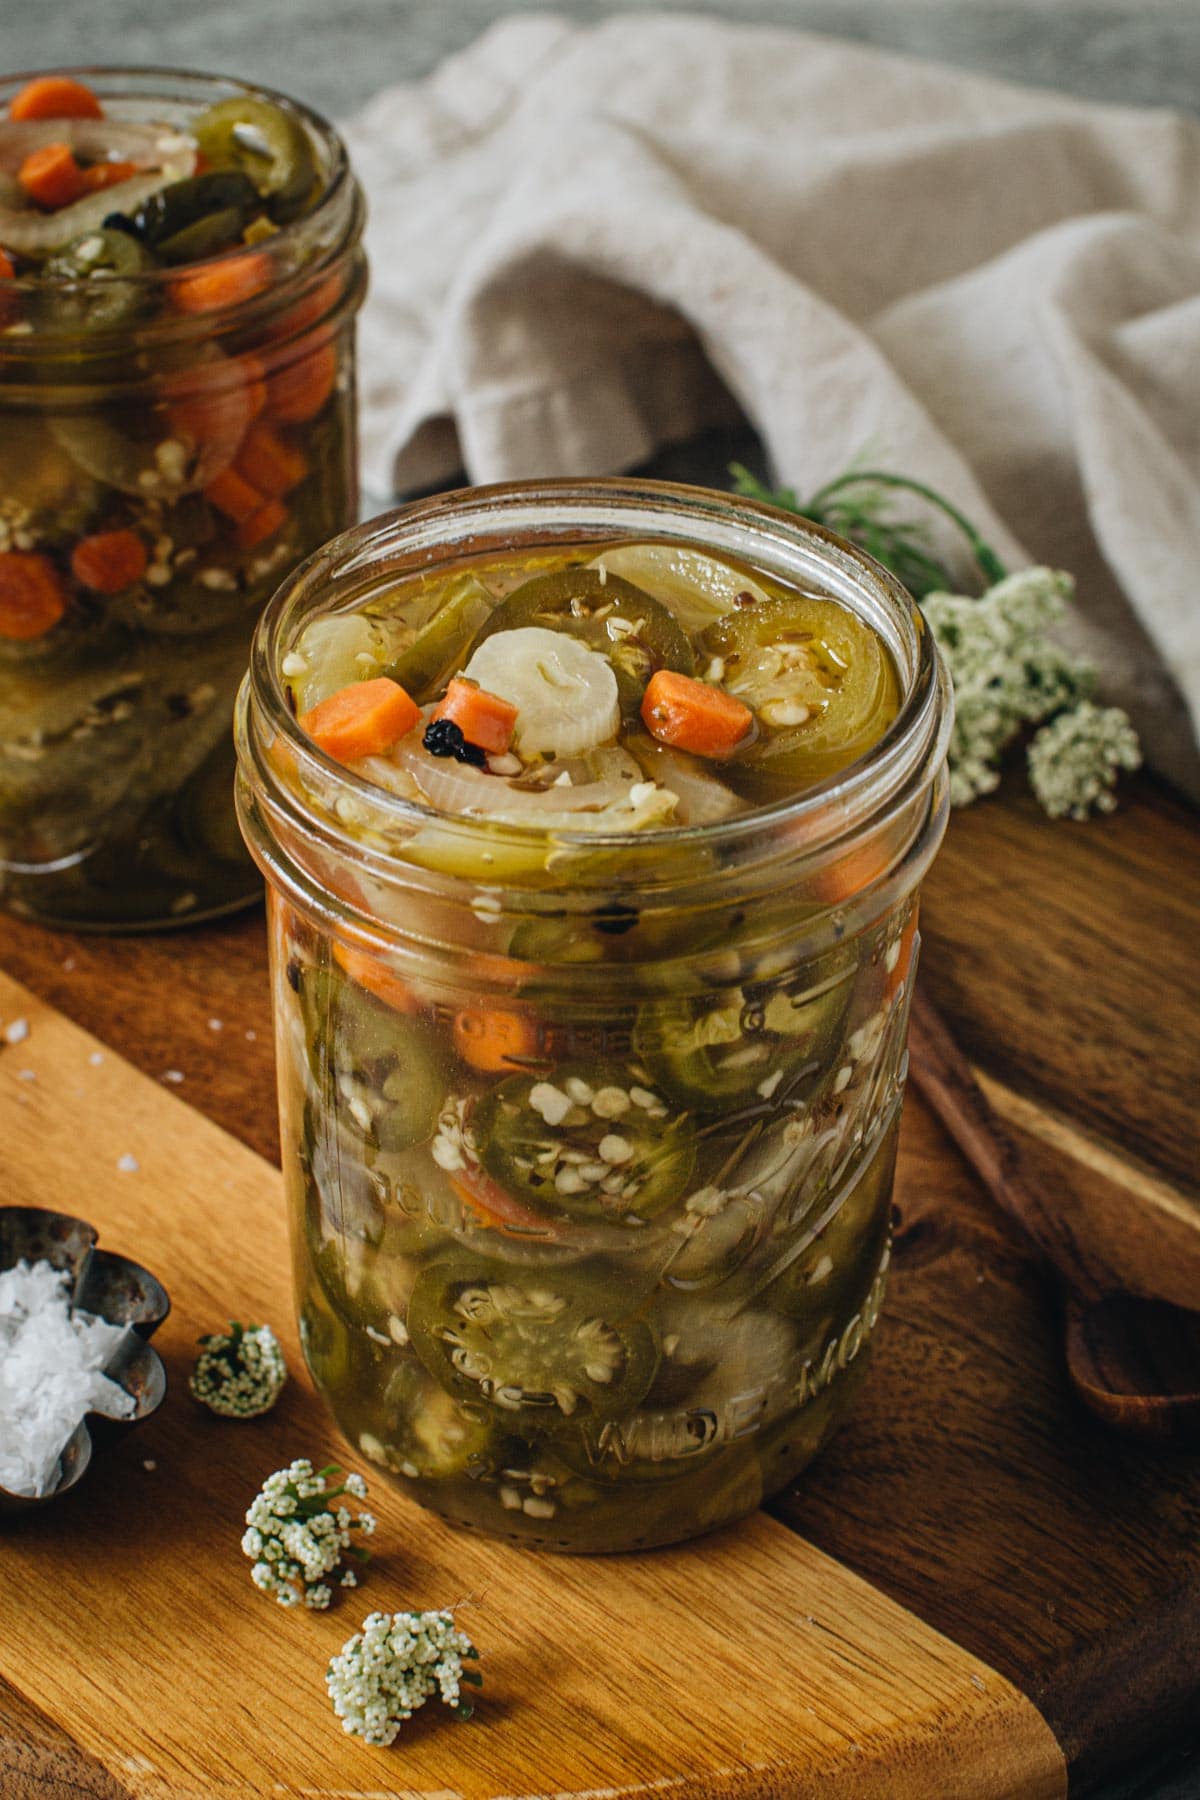 Pickled jalapeños and carrots